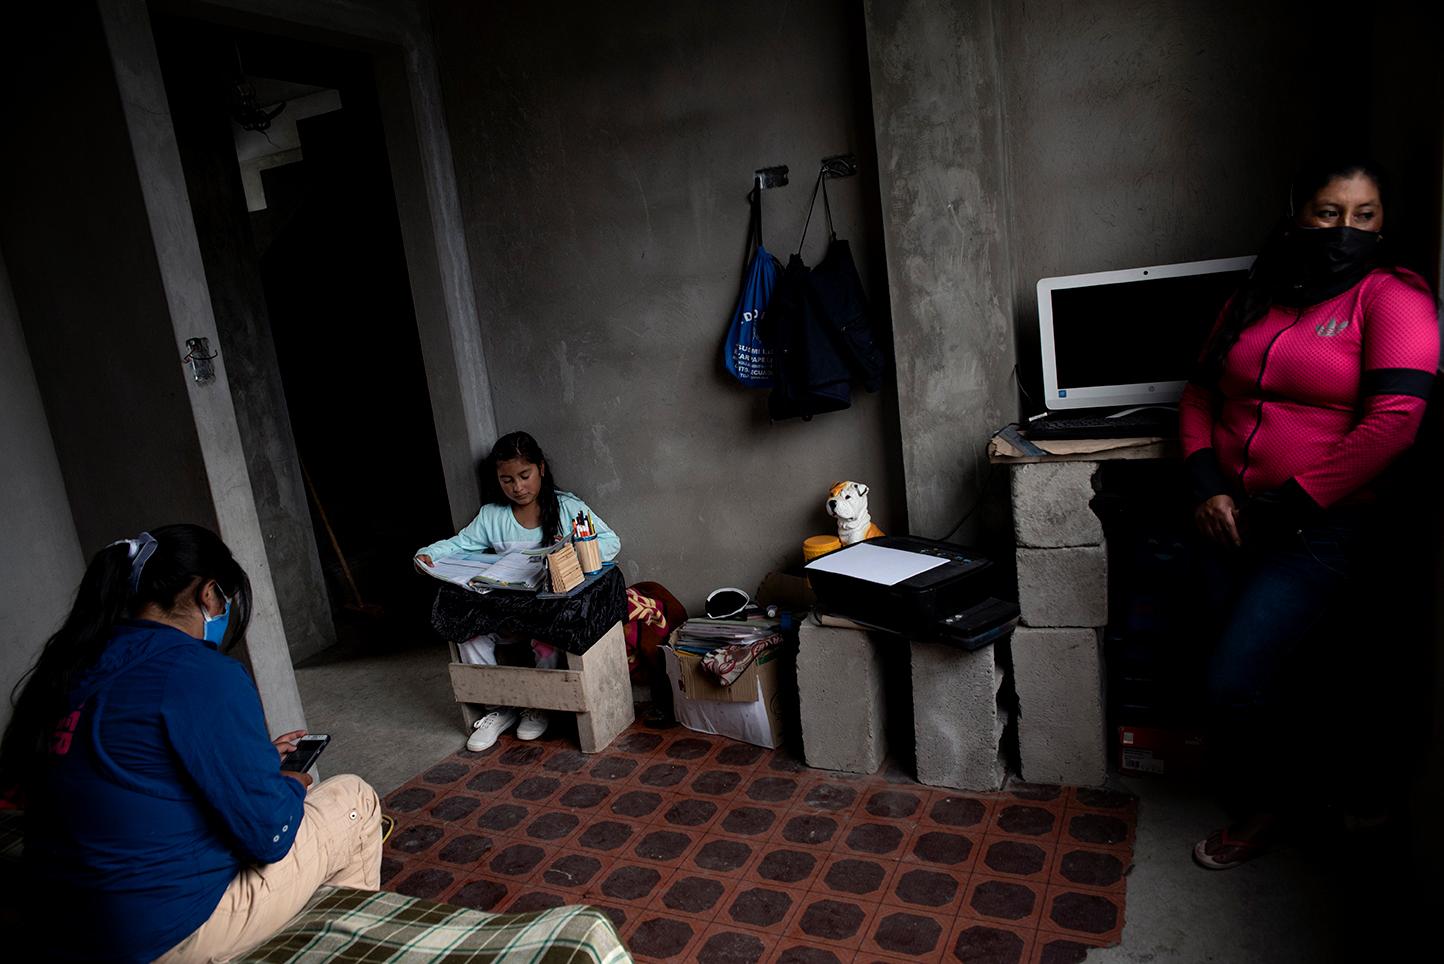 Anah&iacute; Cadena, 11 years old, does her homework at home with the company of her mothers...